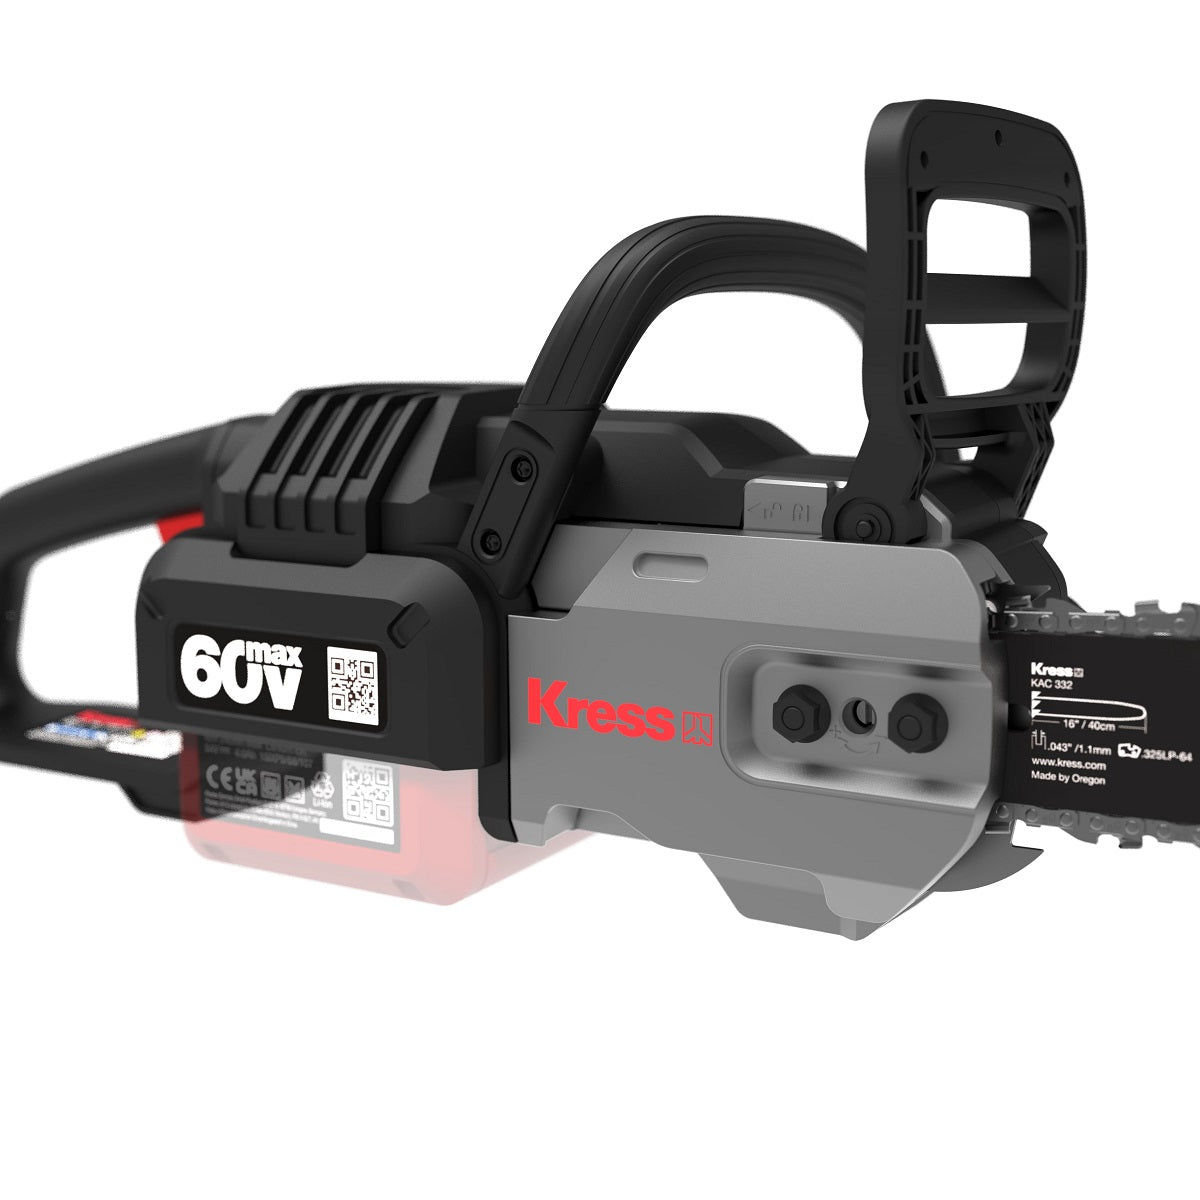 Kress KC300.9 Commercial 60V 40 cm Chainsaw - Tool Only